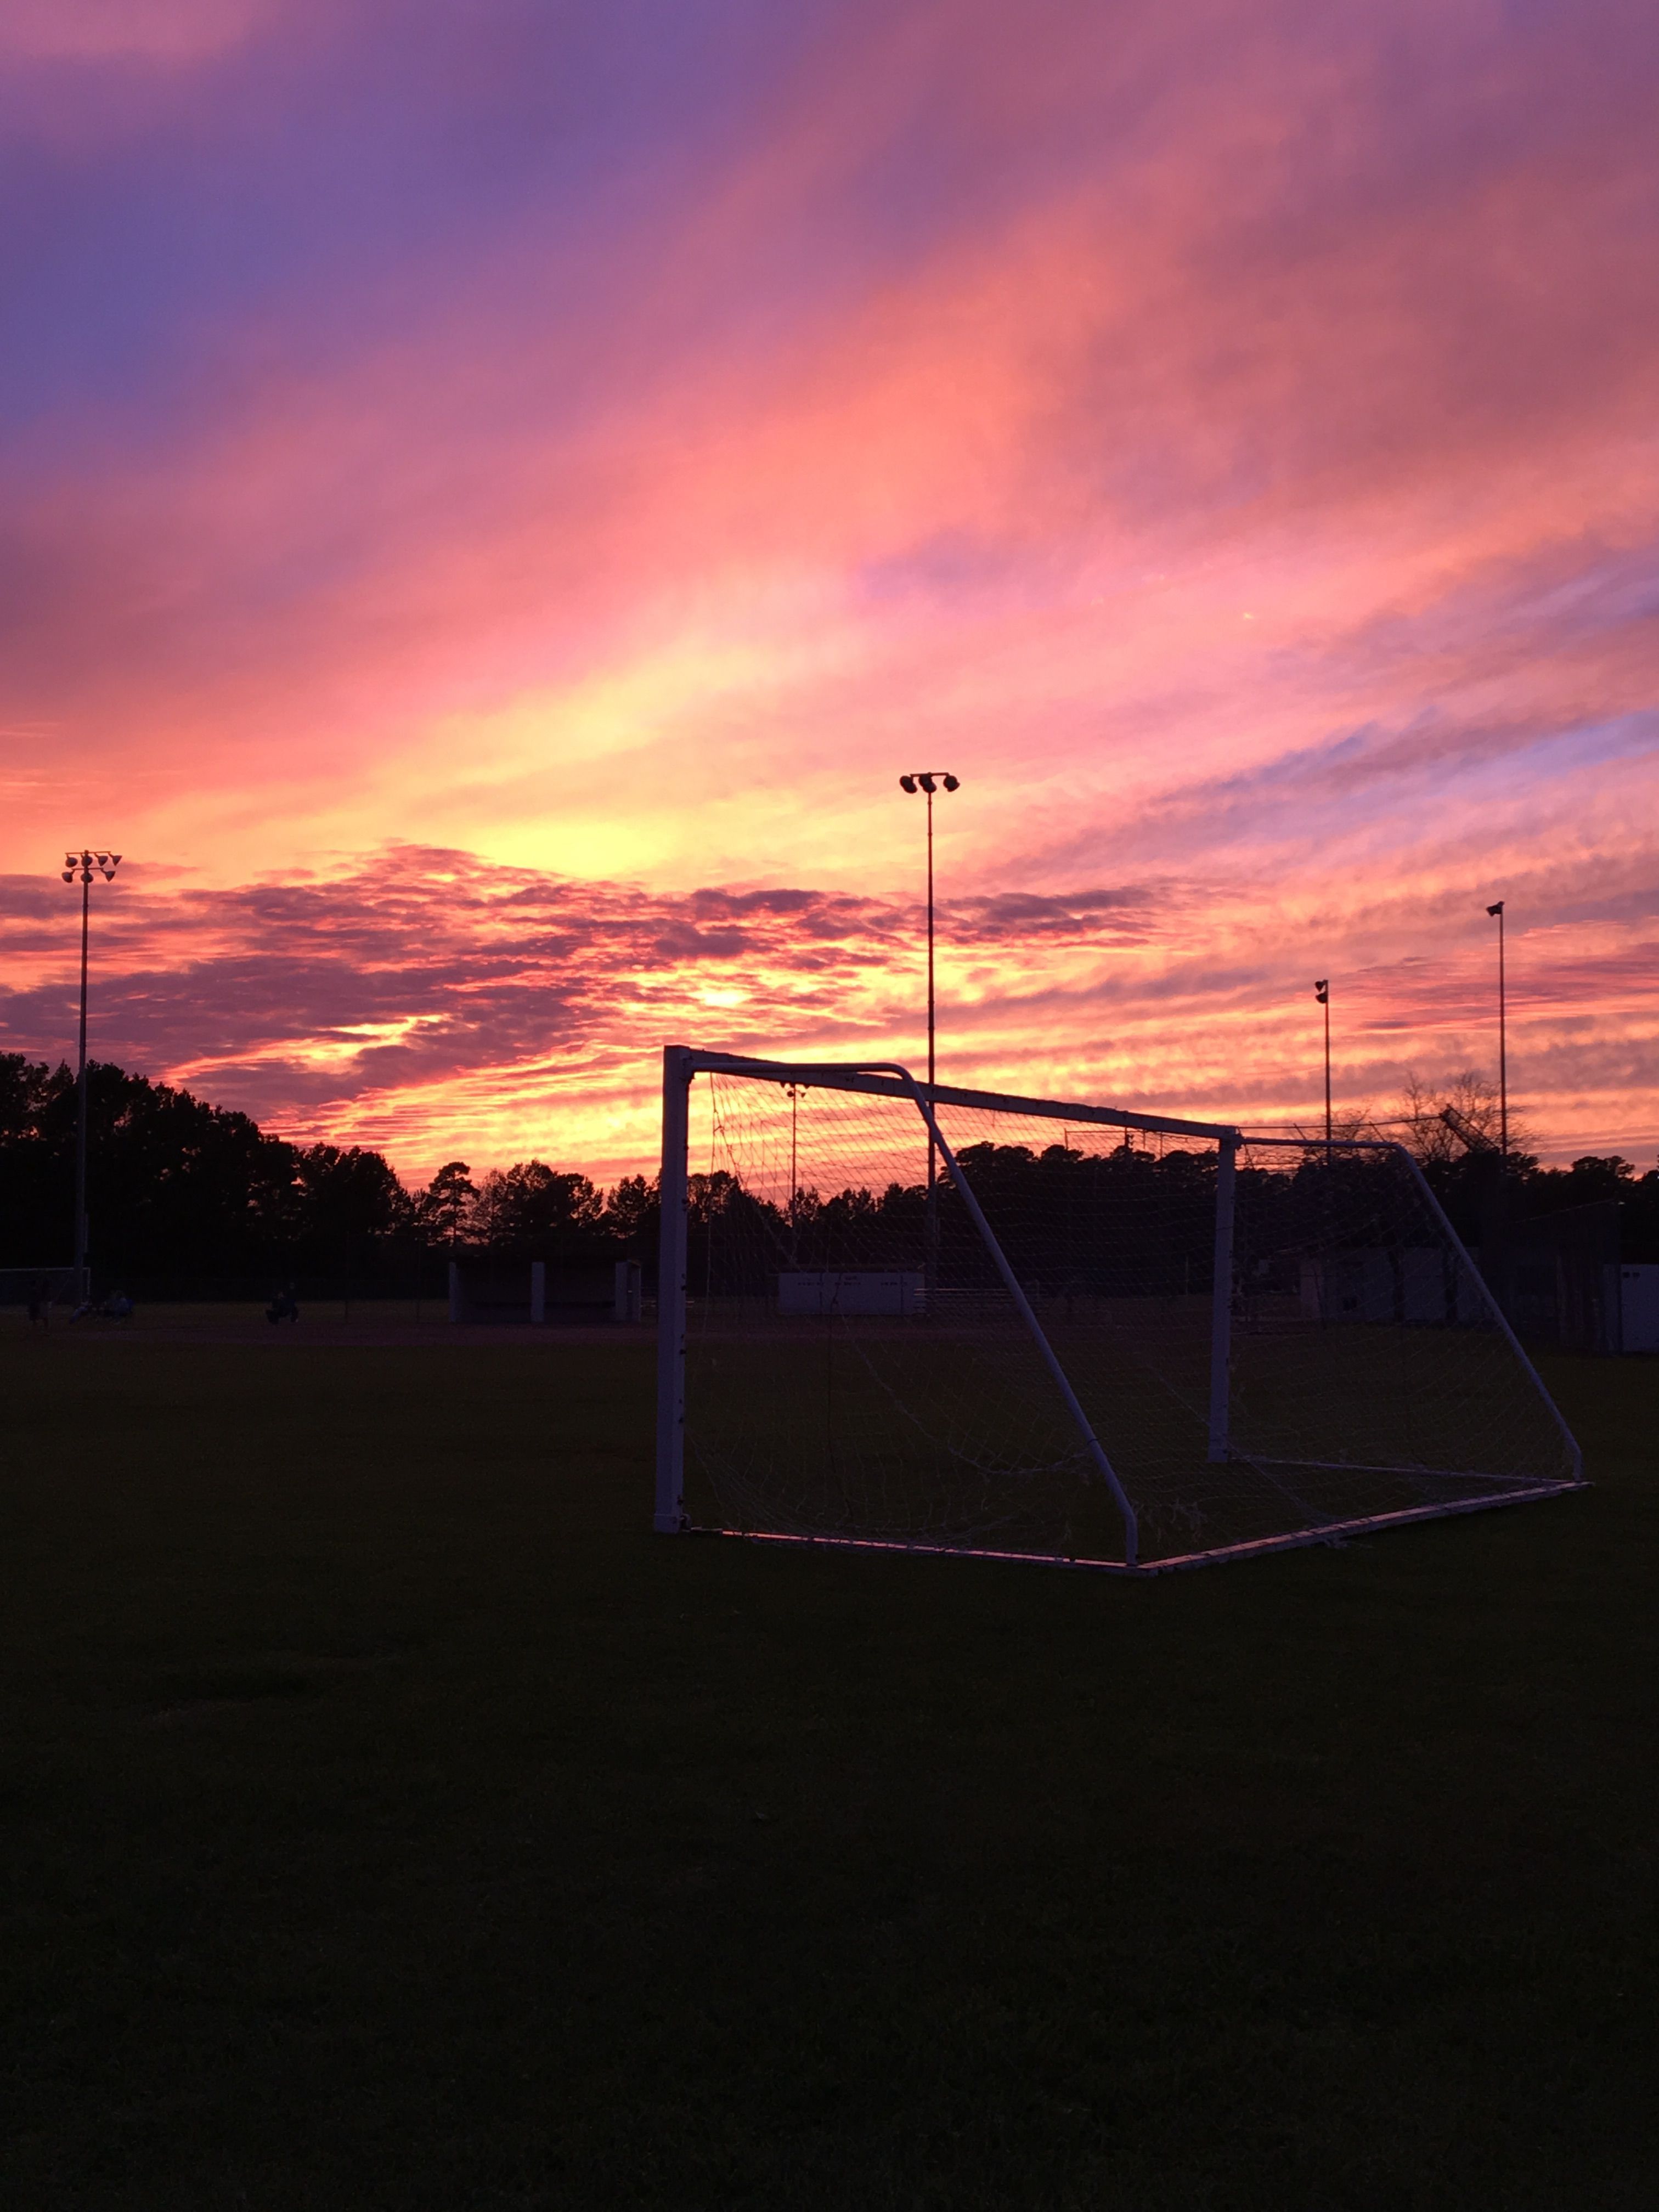 A soccer field with the sun setting in front of it - Soccer